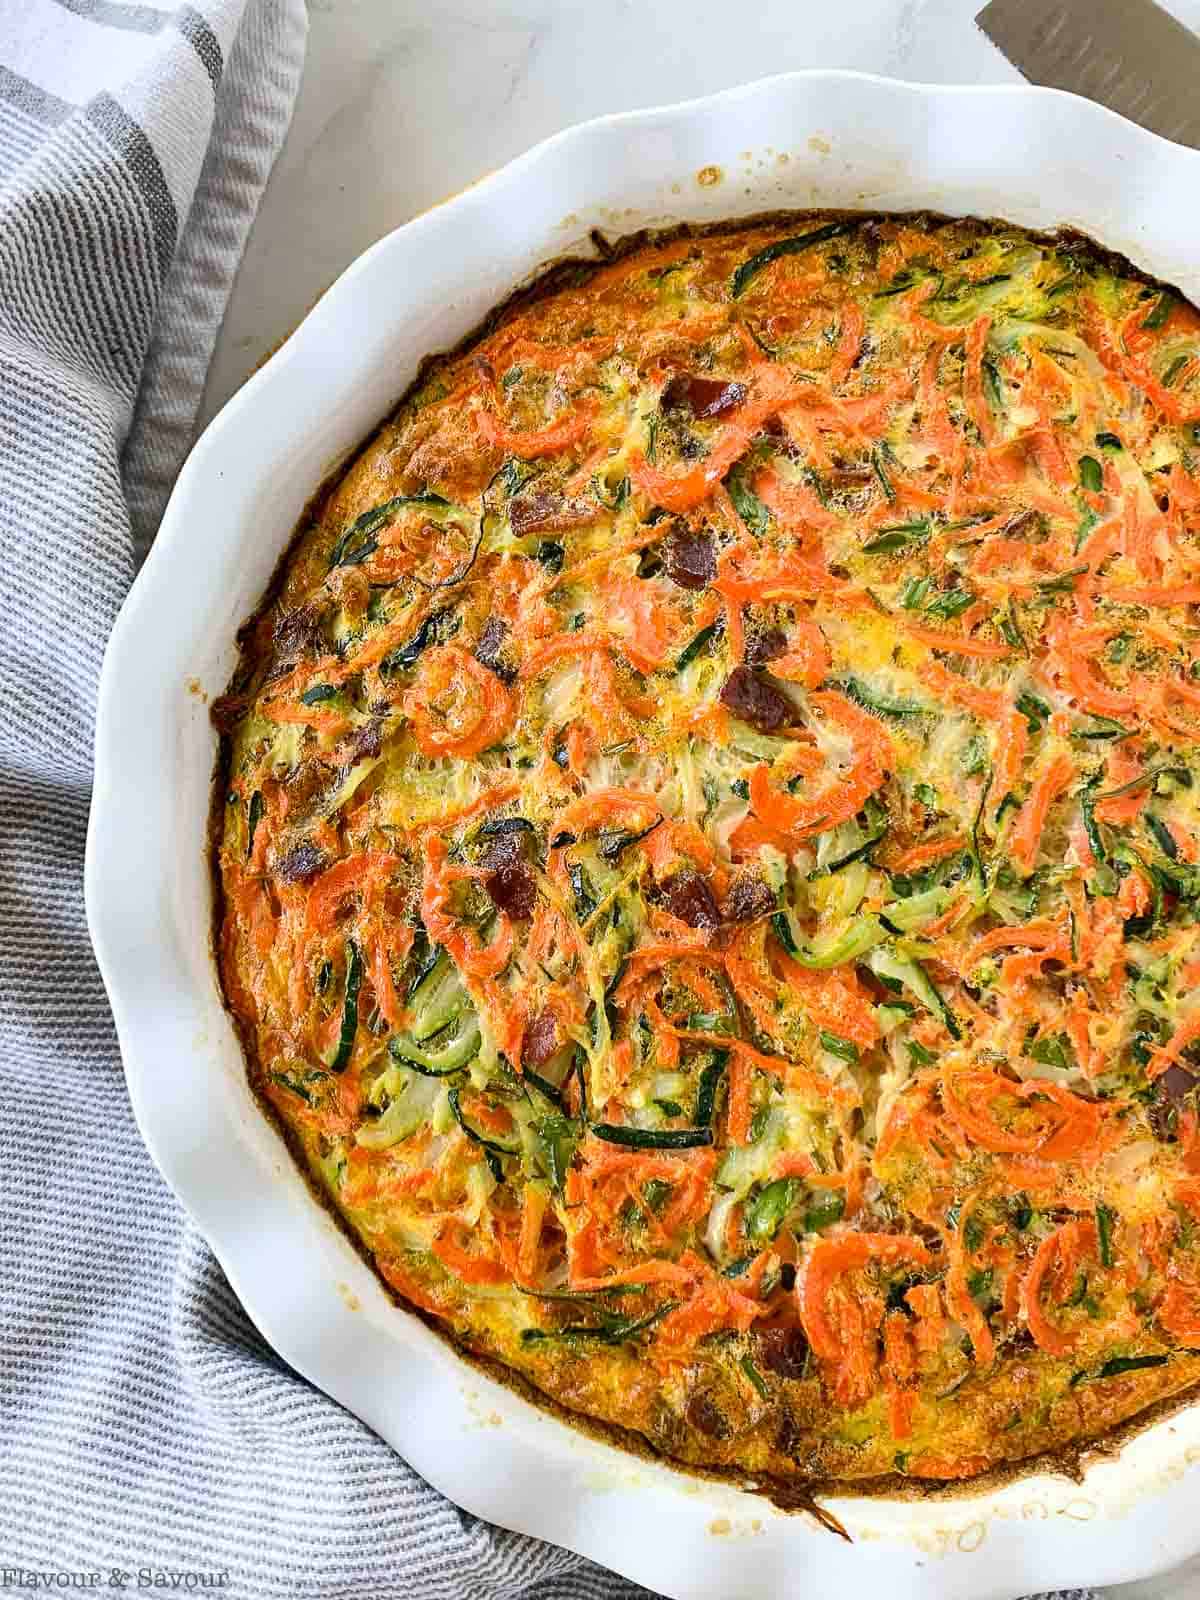 Overhead view of a baking dish with a crustless zucchini carrot quiche.